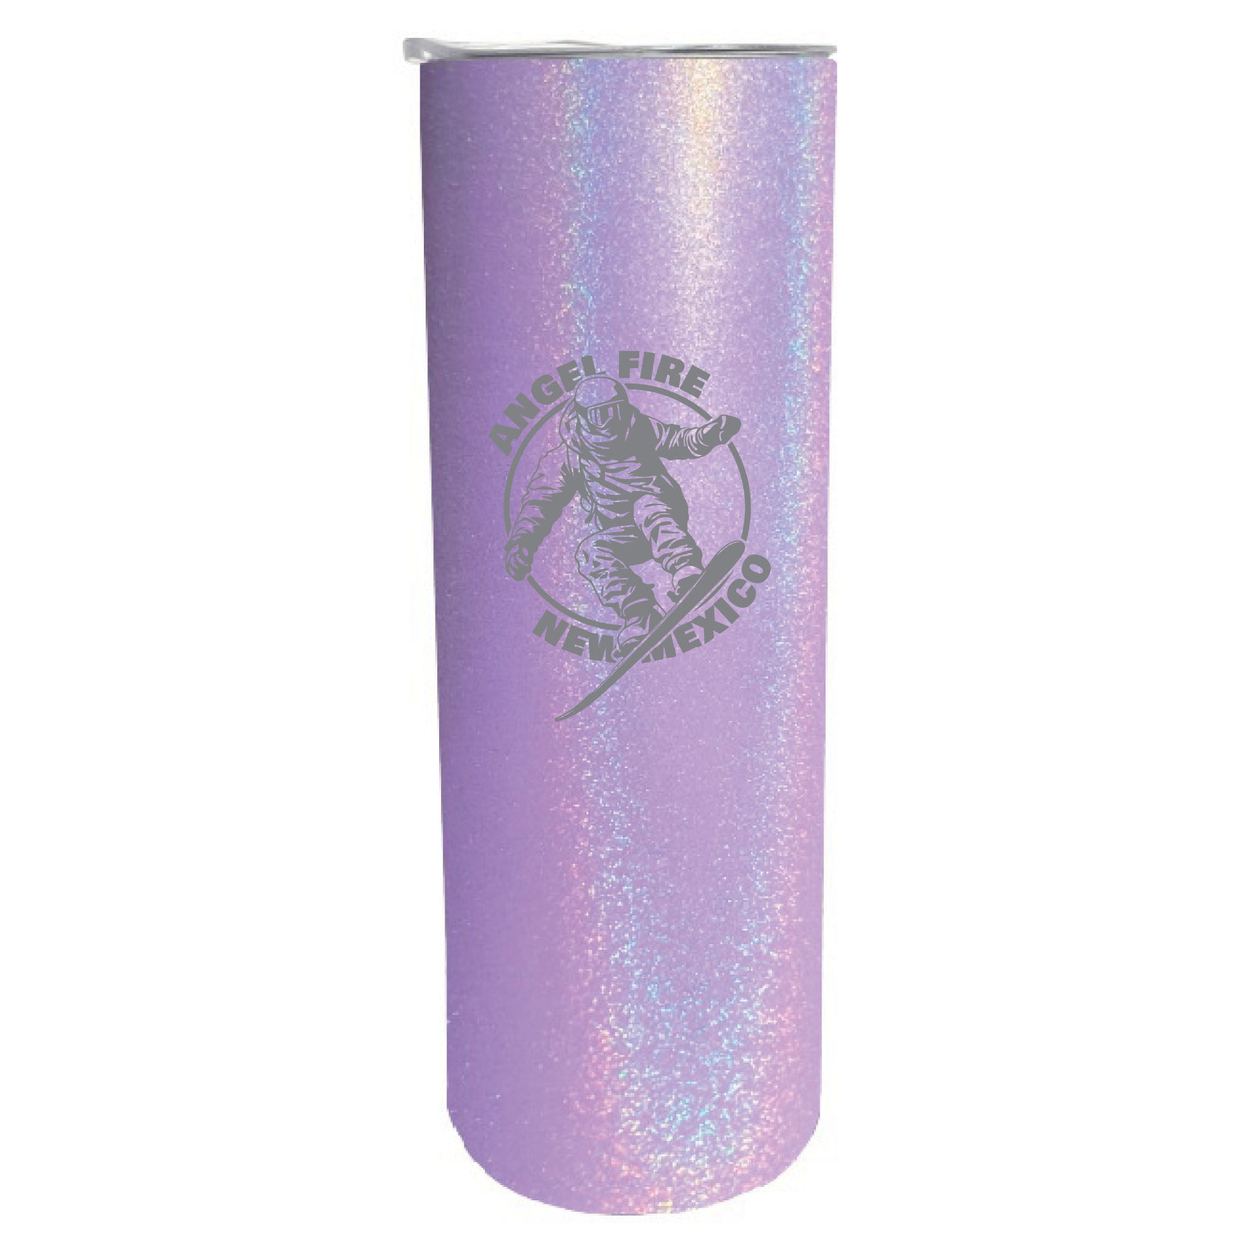 Angel Fire New Mexico Souvenir 20 Oz Engraved Insulated Stainless Steel Skinny Tumbler - Navy,,2-Pack